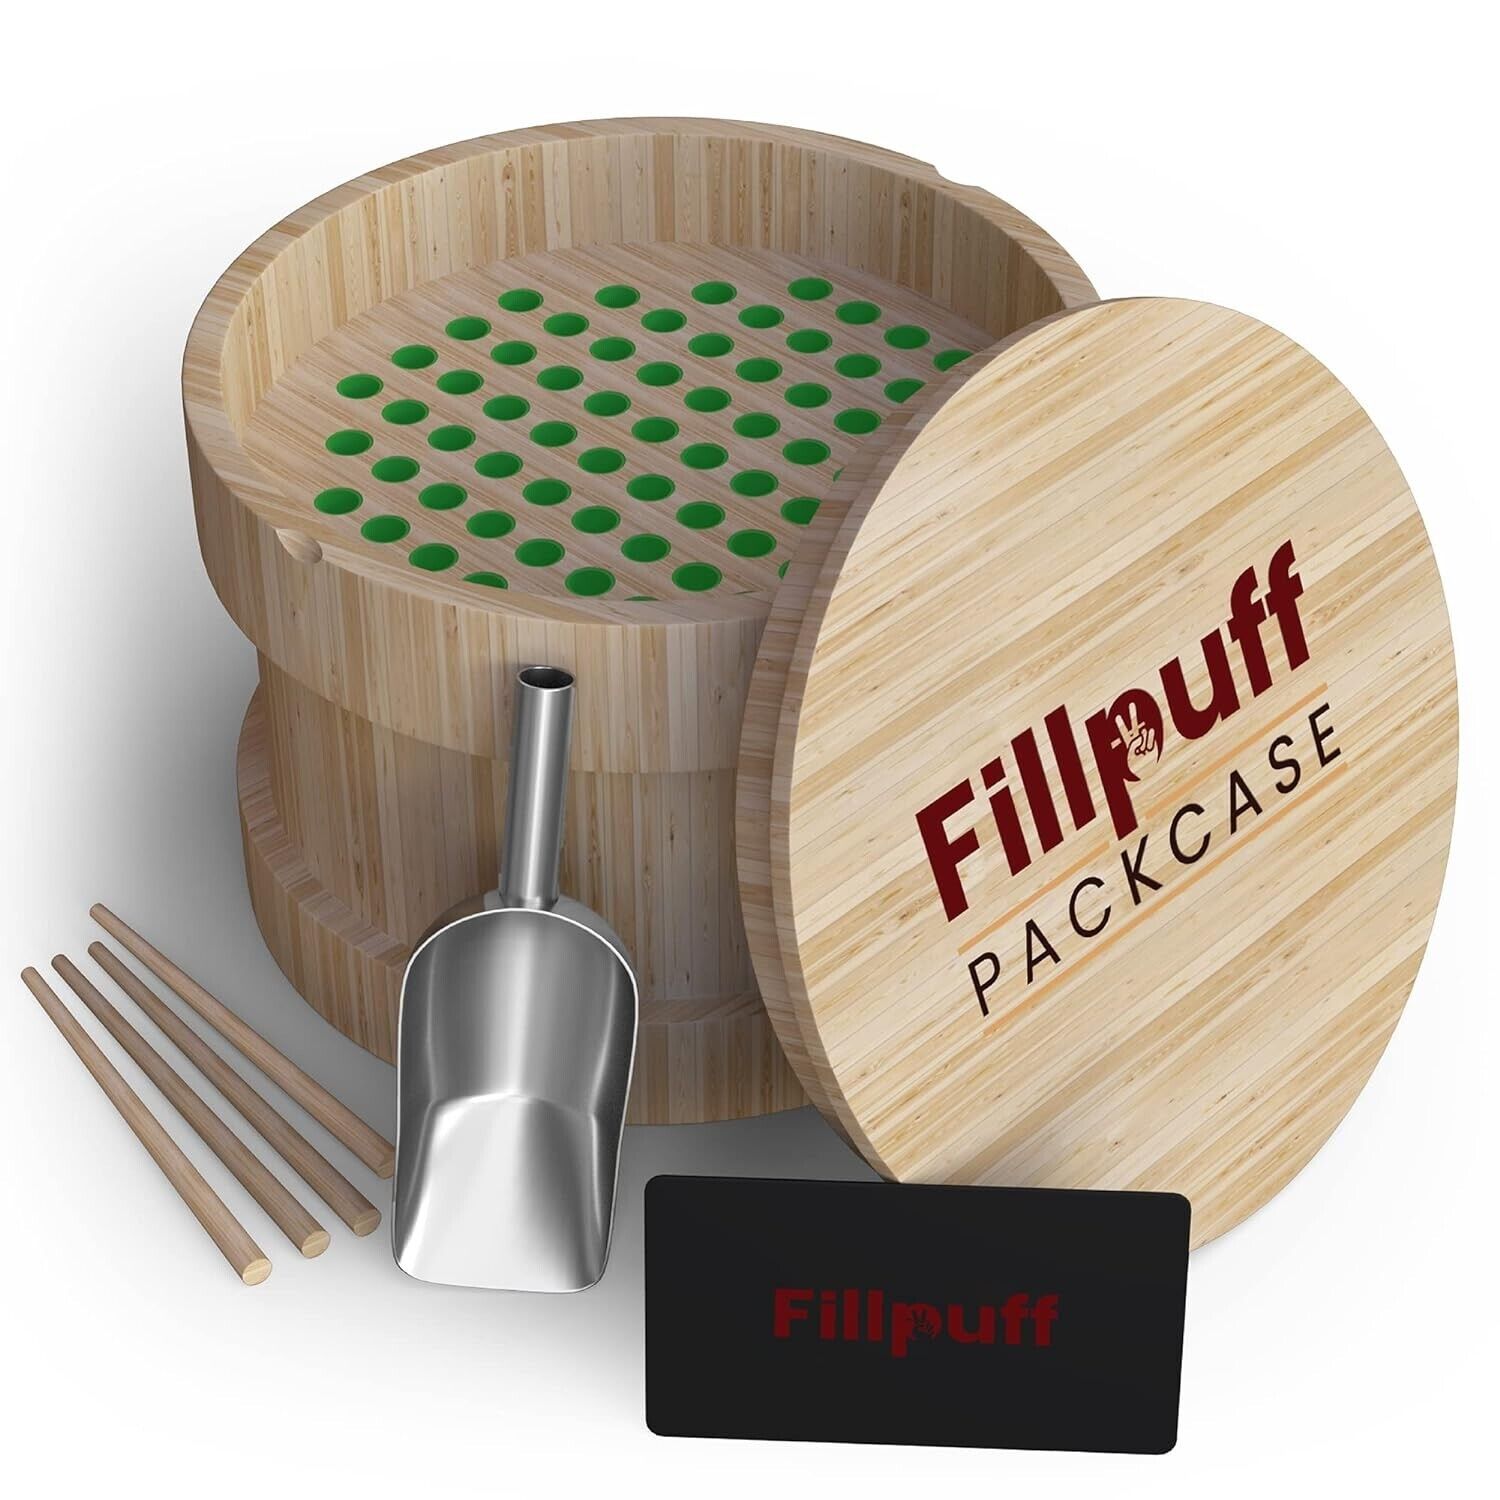 Vivlly Fillpuff Packcase Packer for Cones Multiple Cone Loader & Rapid Filler